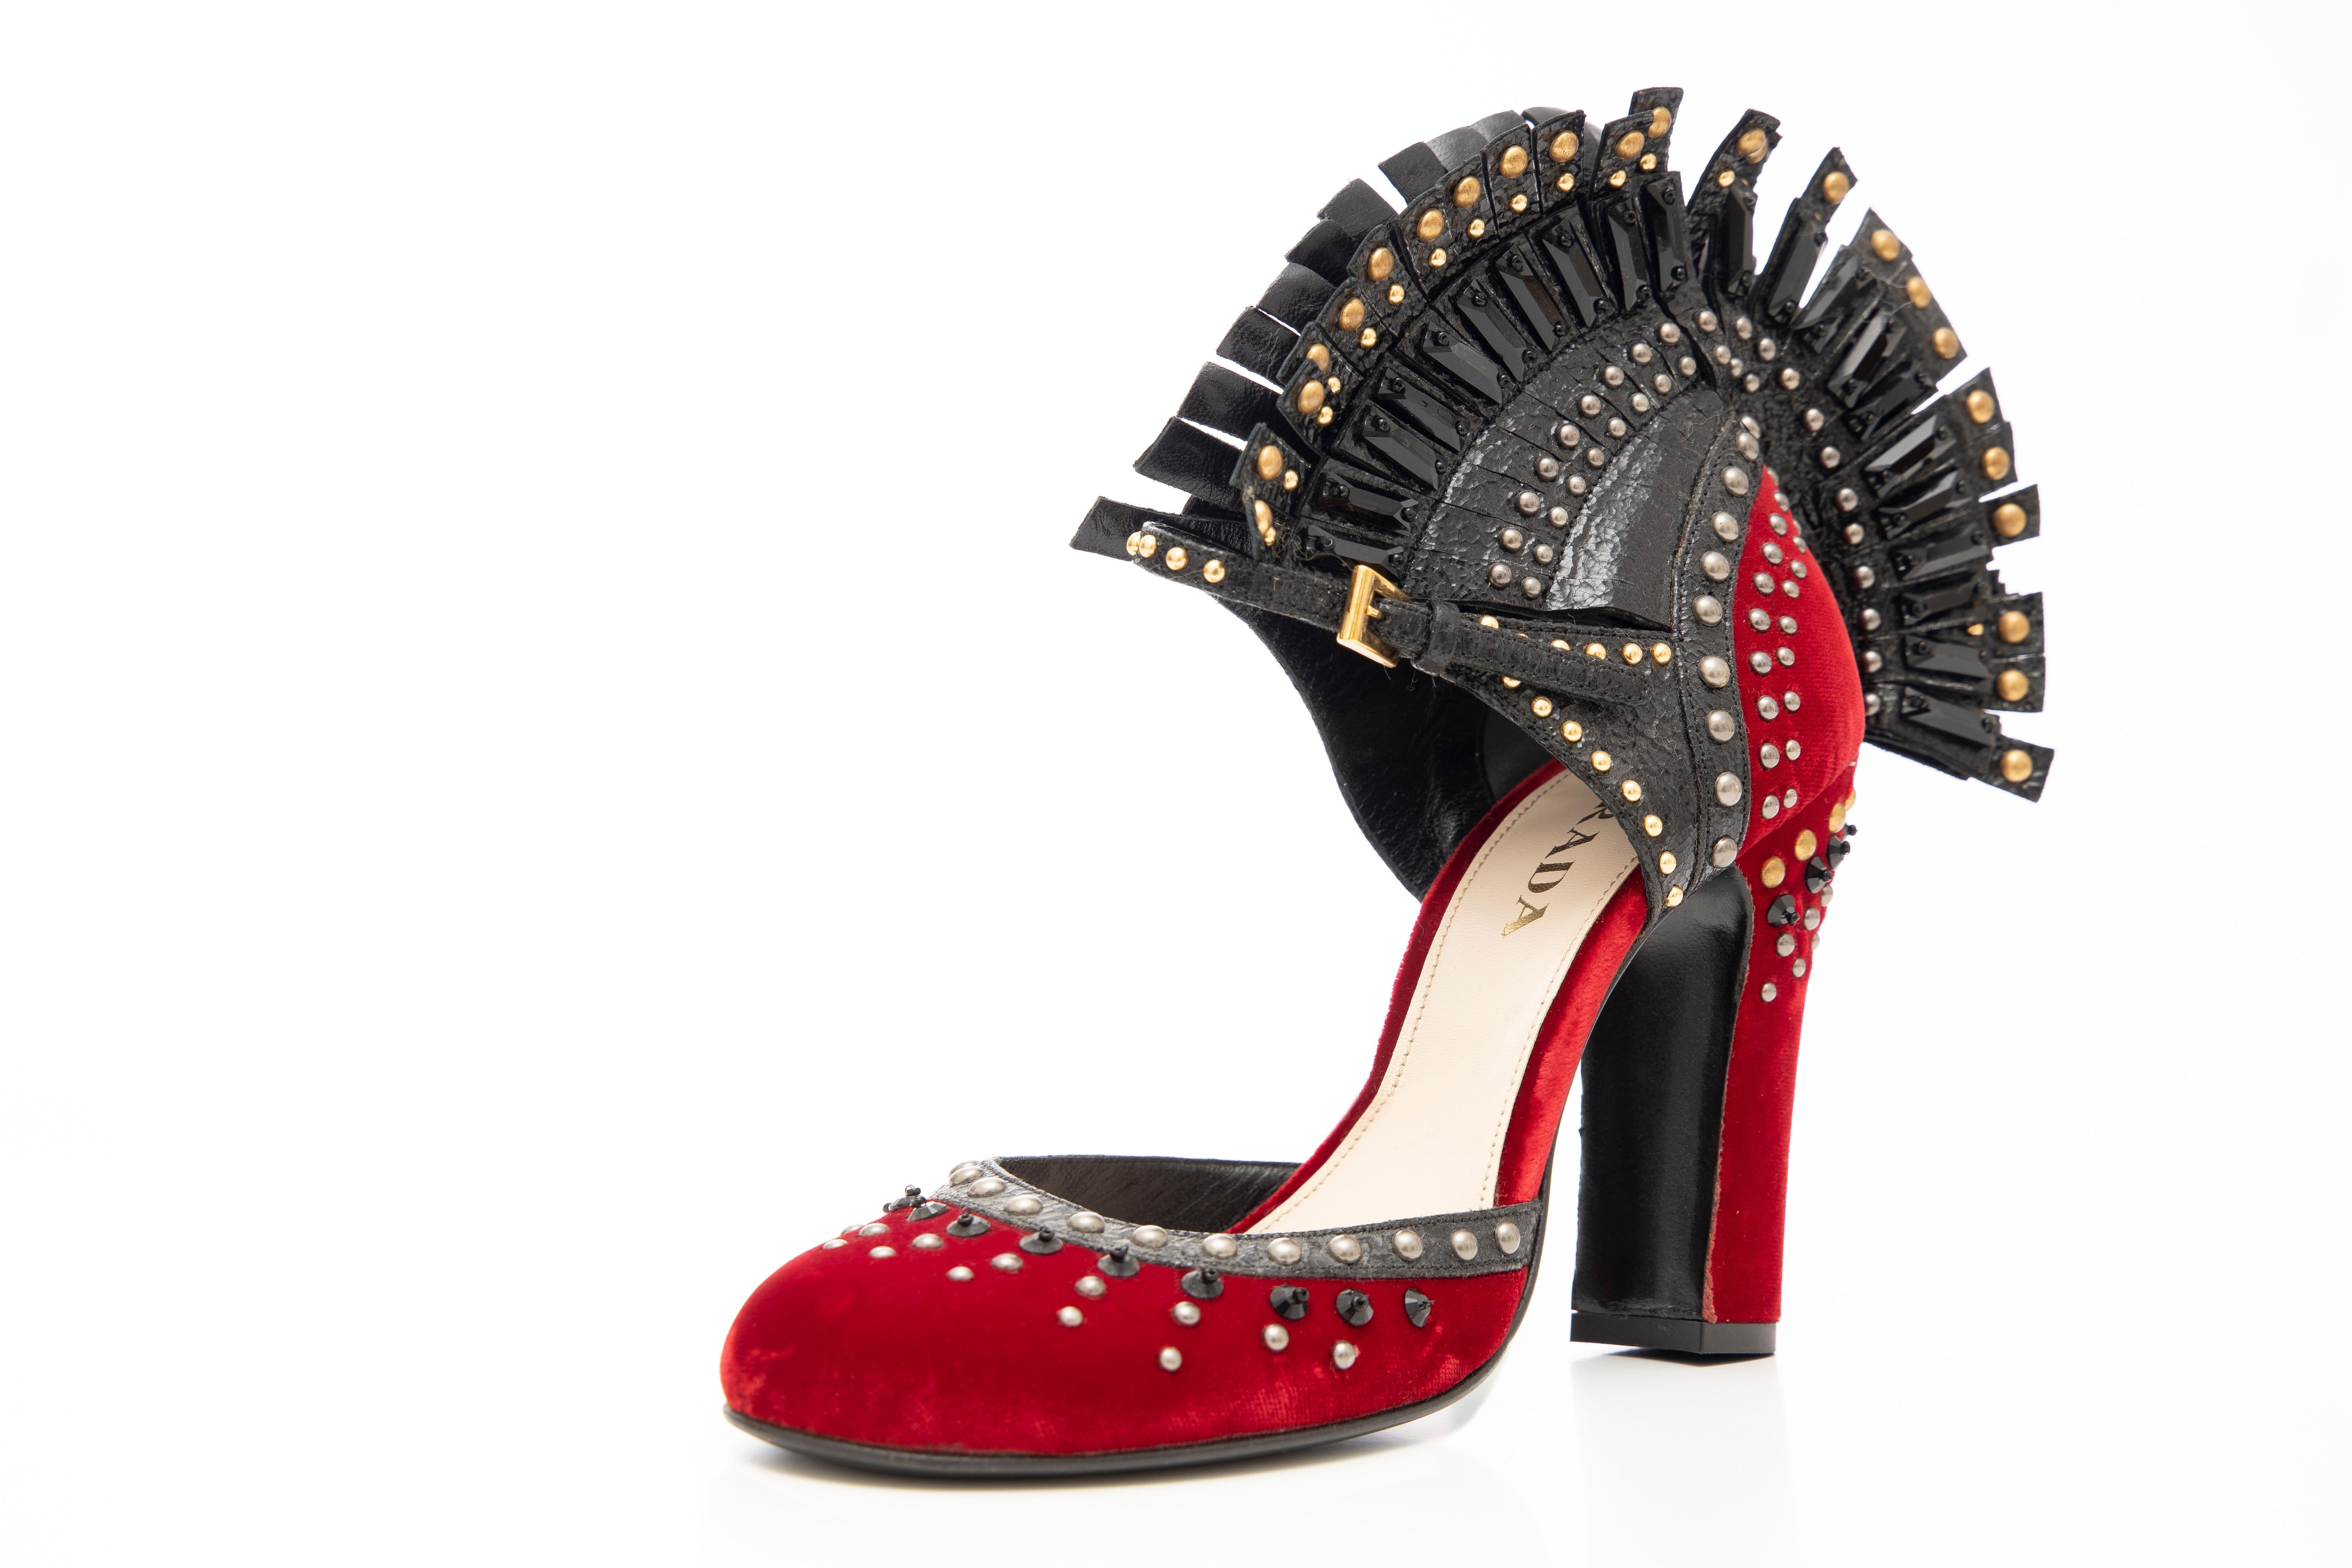 Prada, Runway Fall 2009. red studded velvet with black studded faceted crystal, fringe leather, round toe ankle strap mohawk pumps.

IT. 37, US. 7
Heels: 4.25